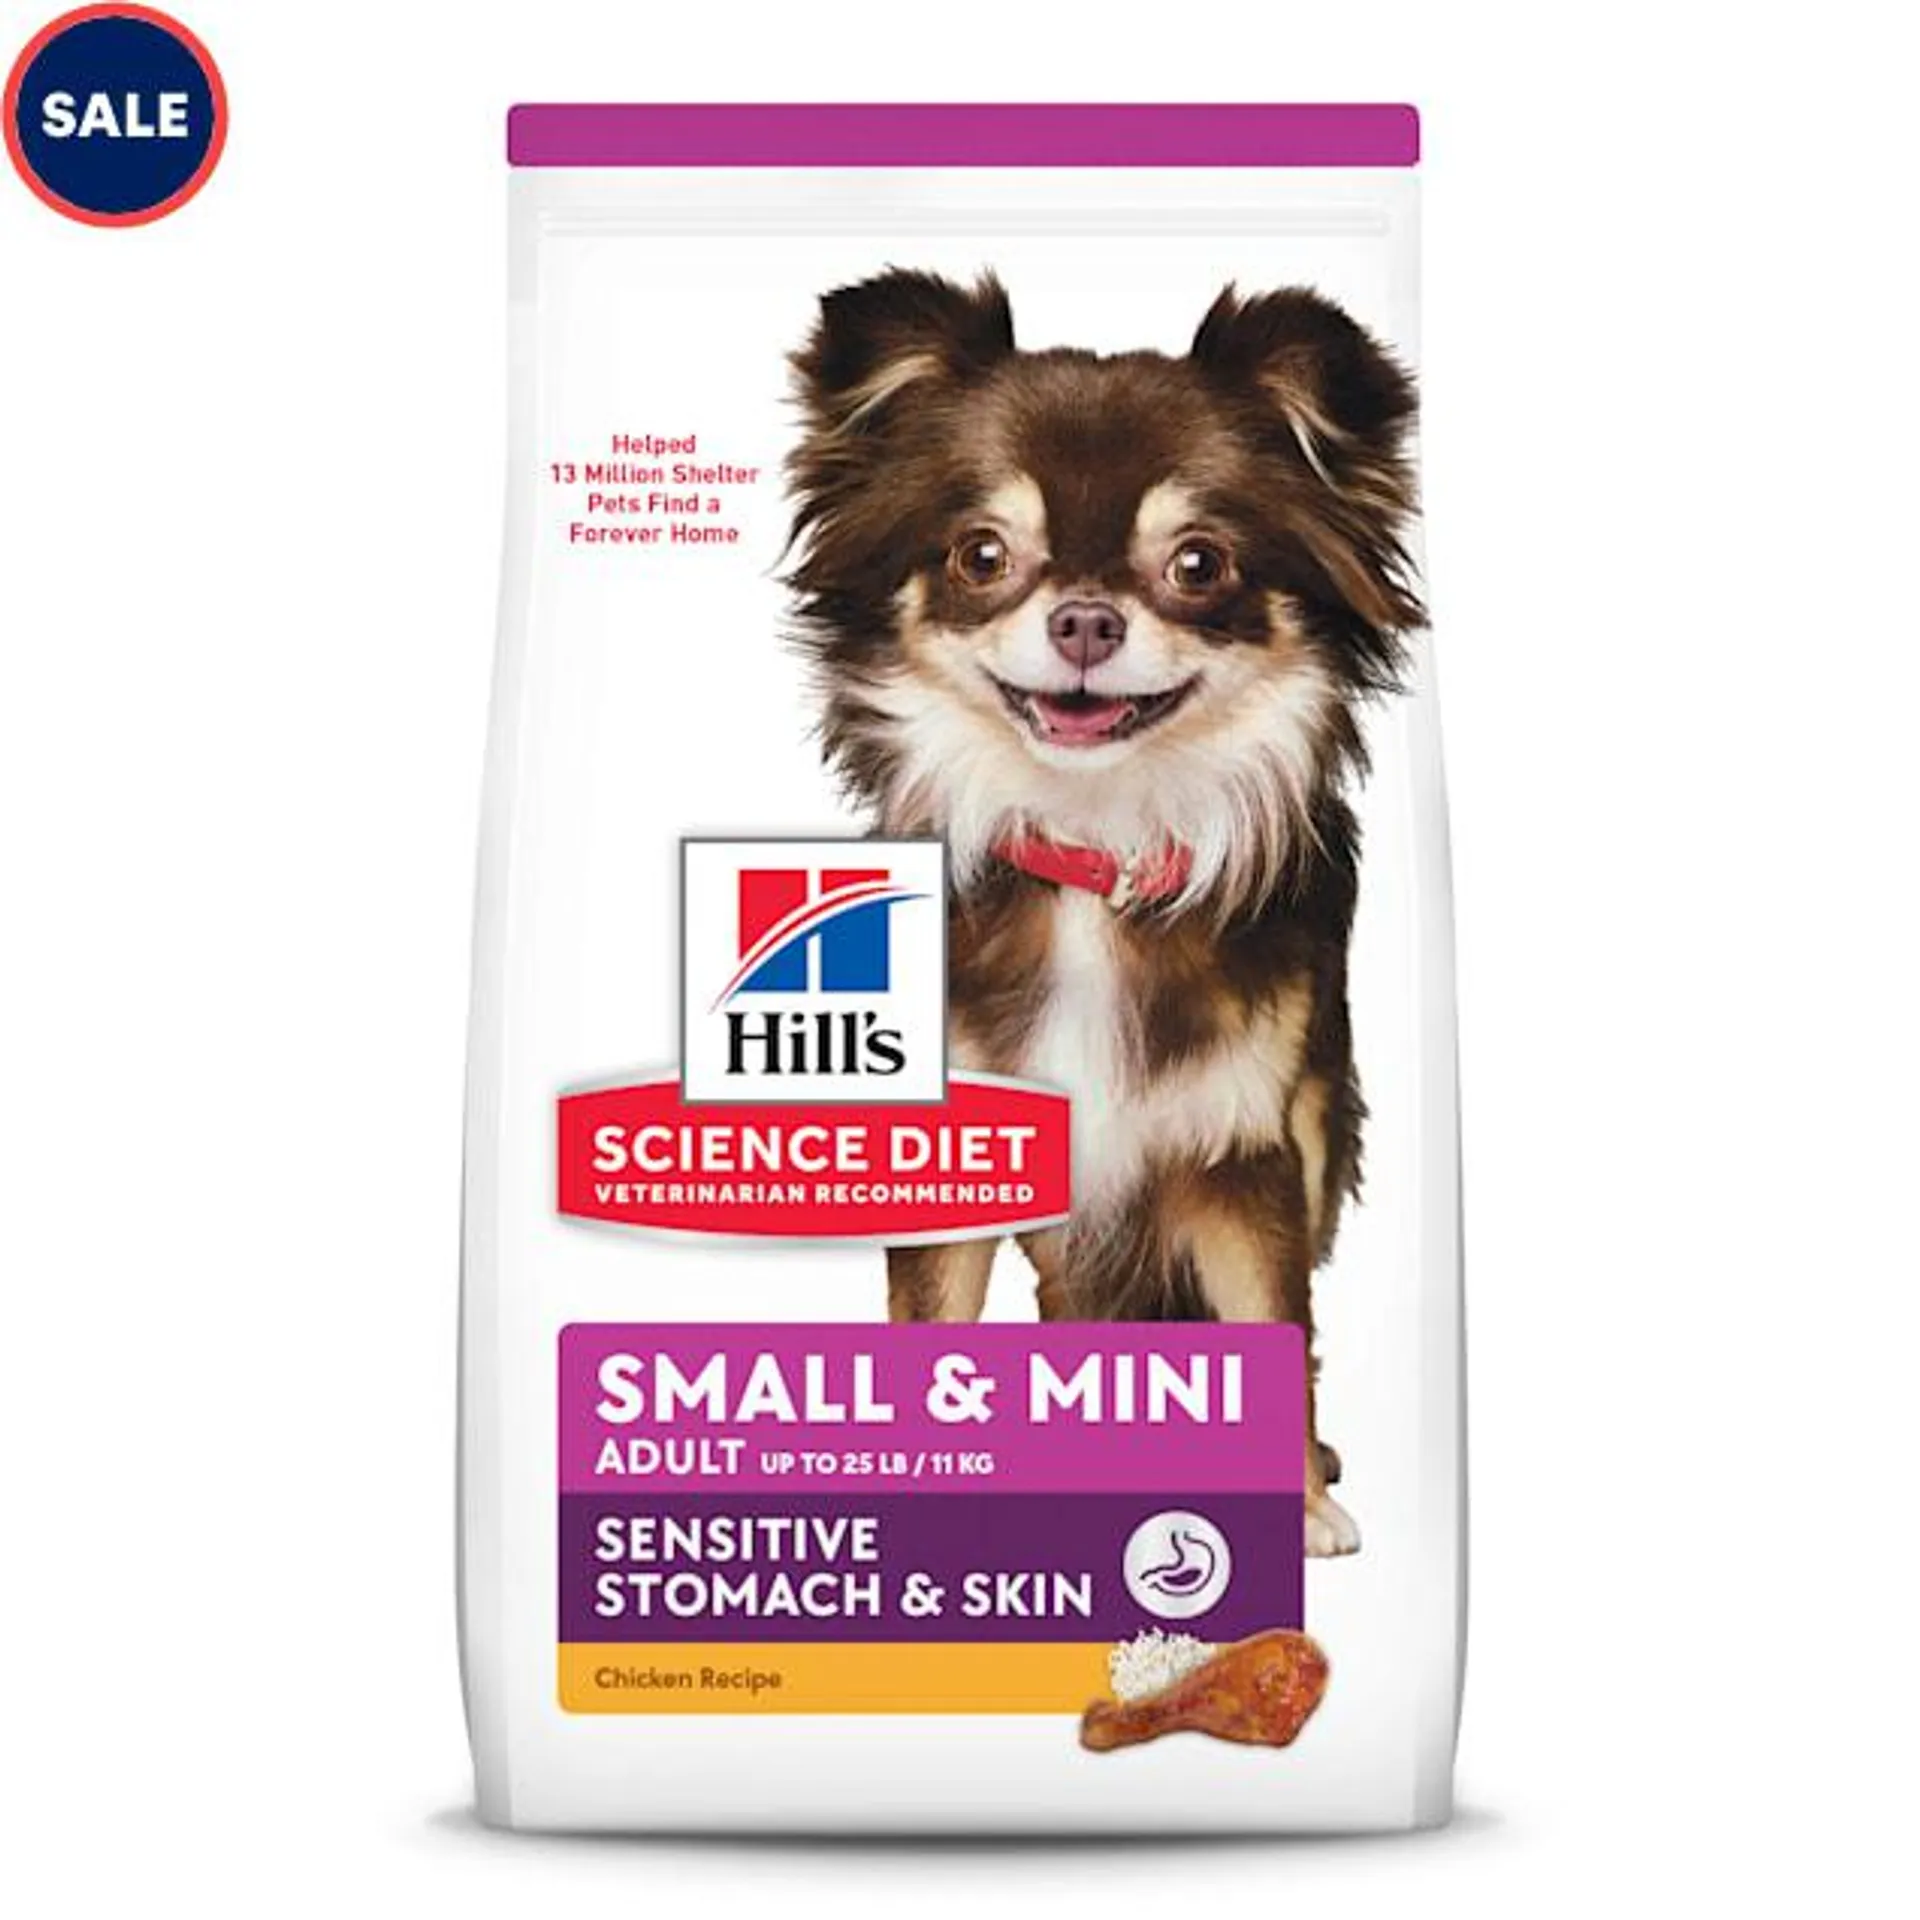 Hill's Science Diet Adult Sensitive Stomach & Skin Small & Mini Chicken Recipe Dry Dog Food, 15 lbs.